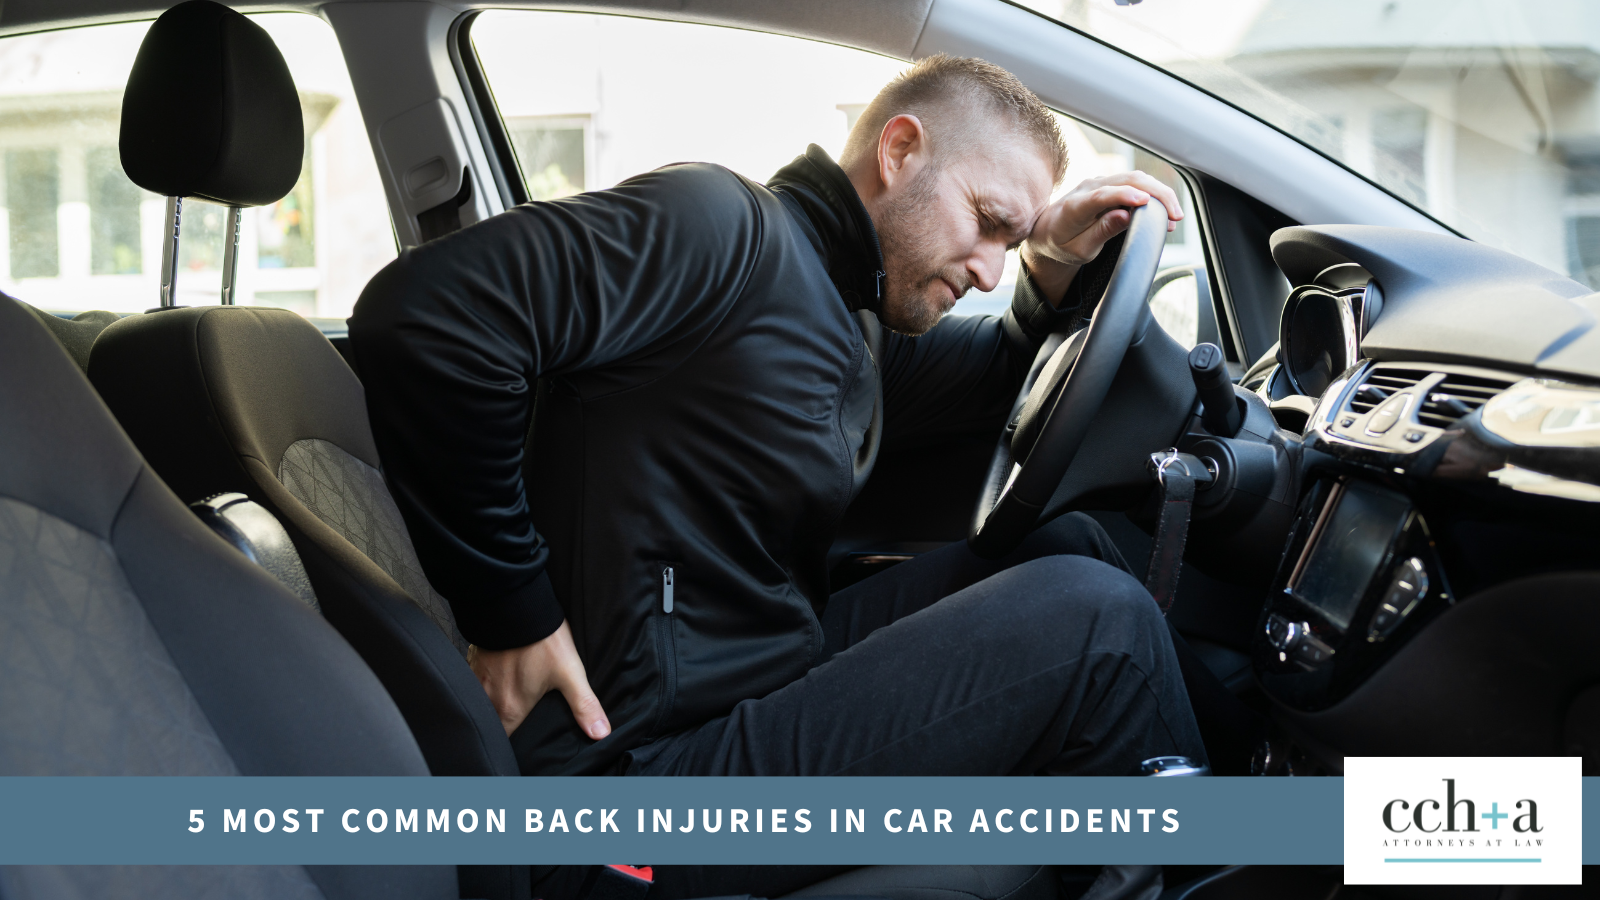 Image of a man in car with back pain